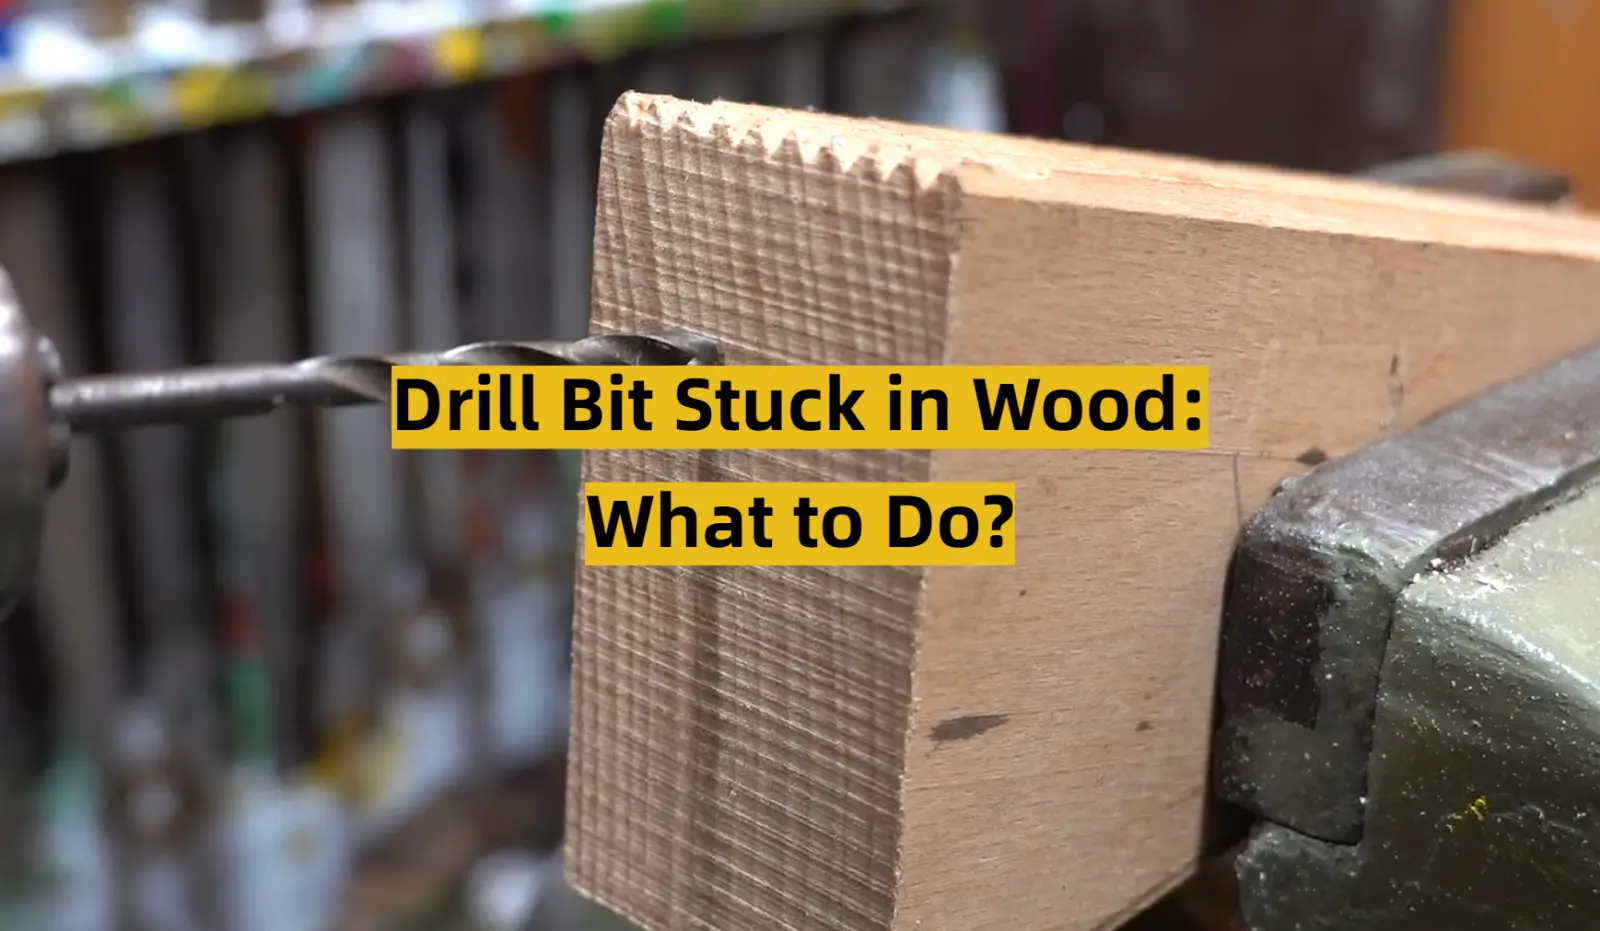 Drill Bit Stuck in Wood: What to Do?